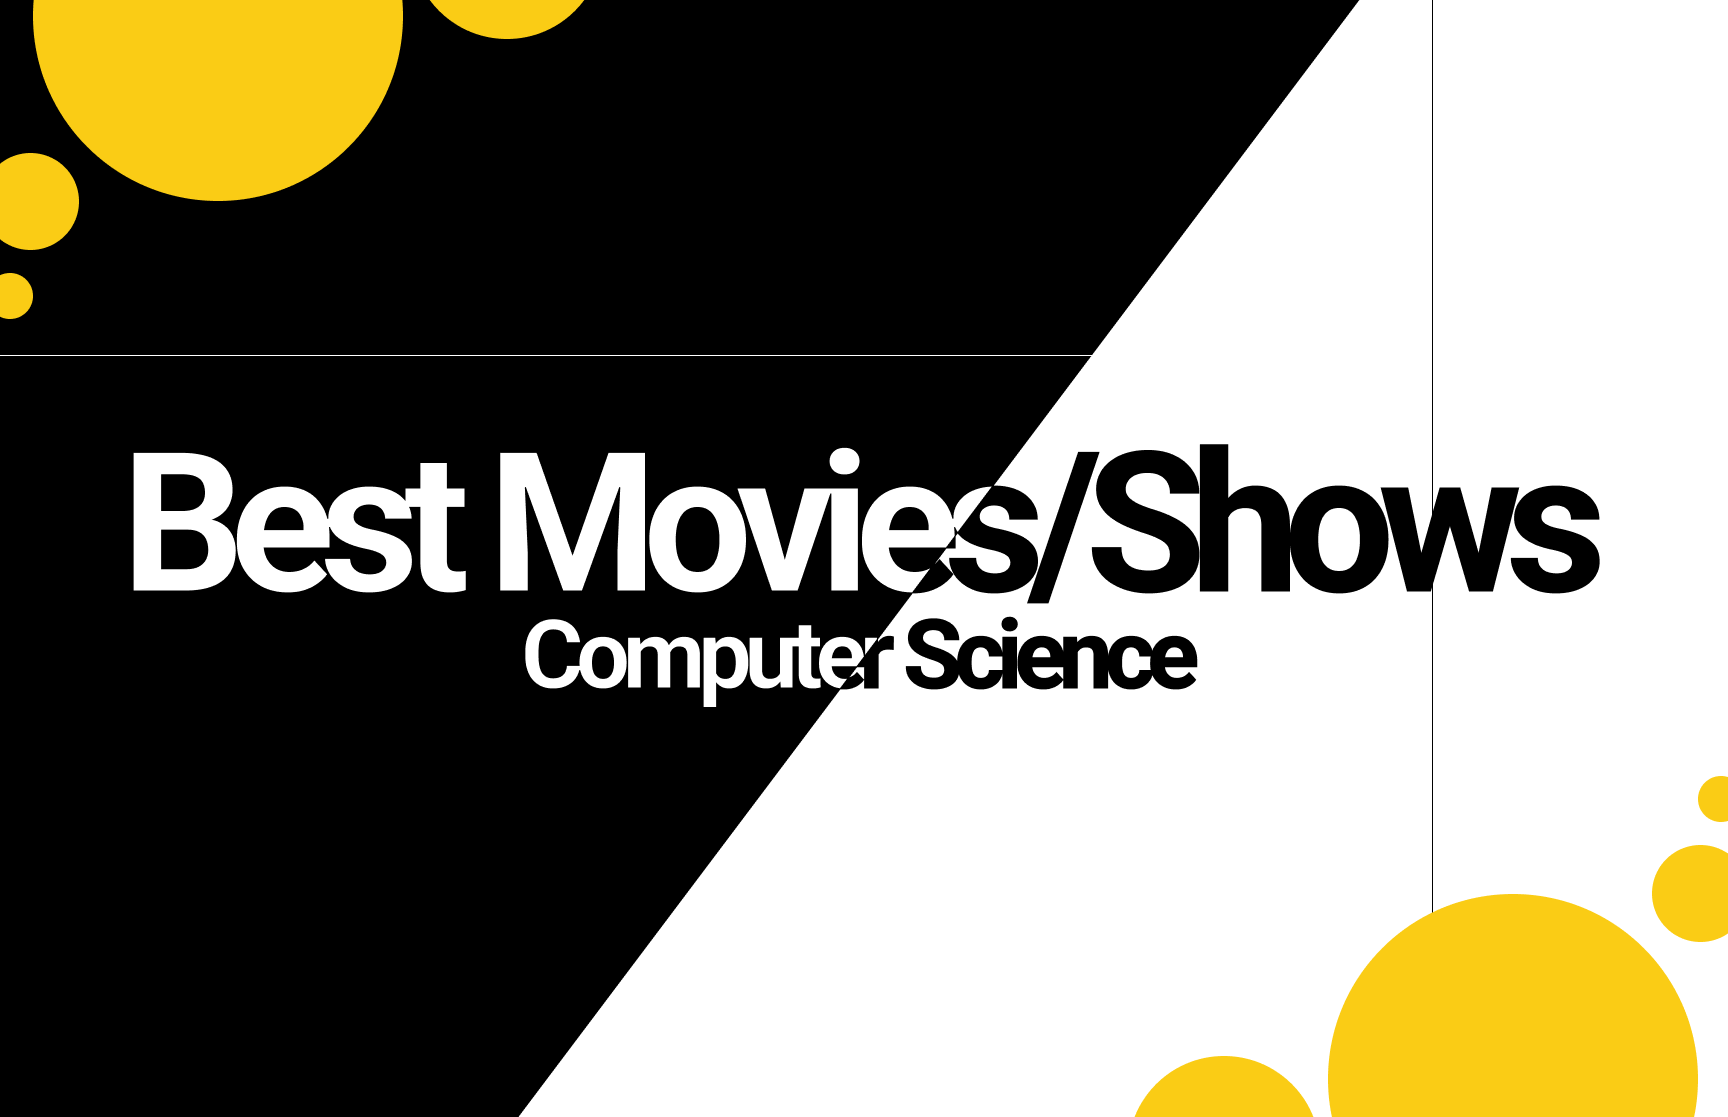 Best Computer Science Related Movies and Shows feature image